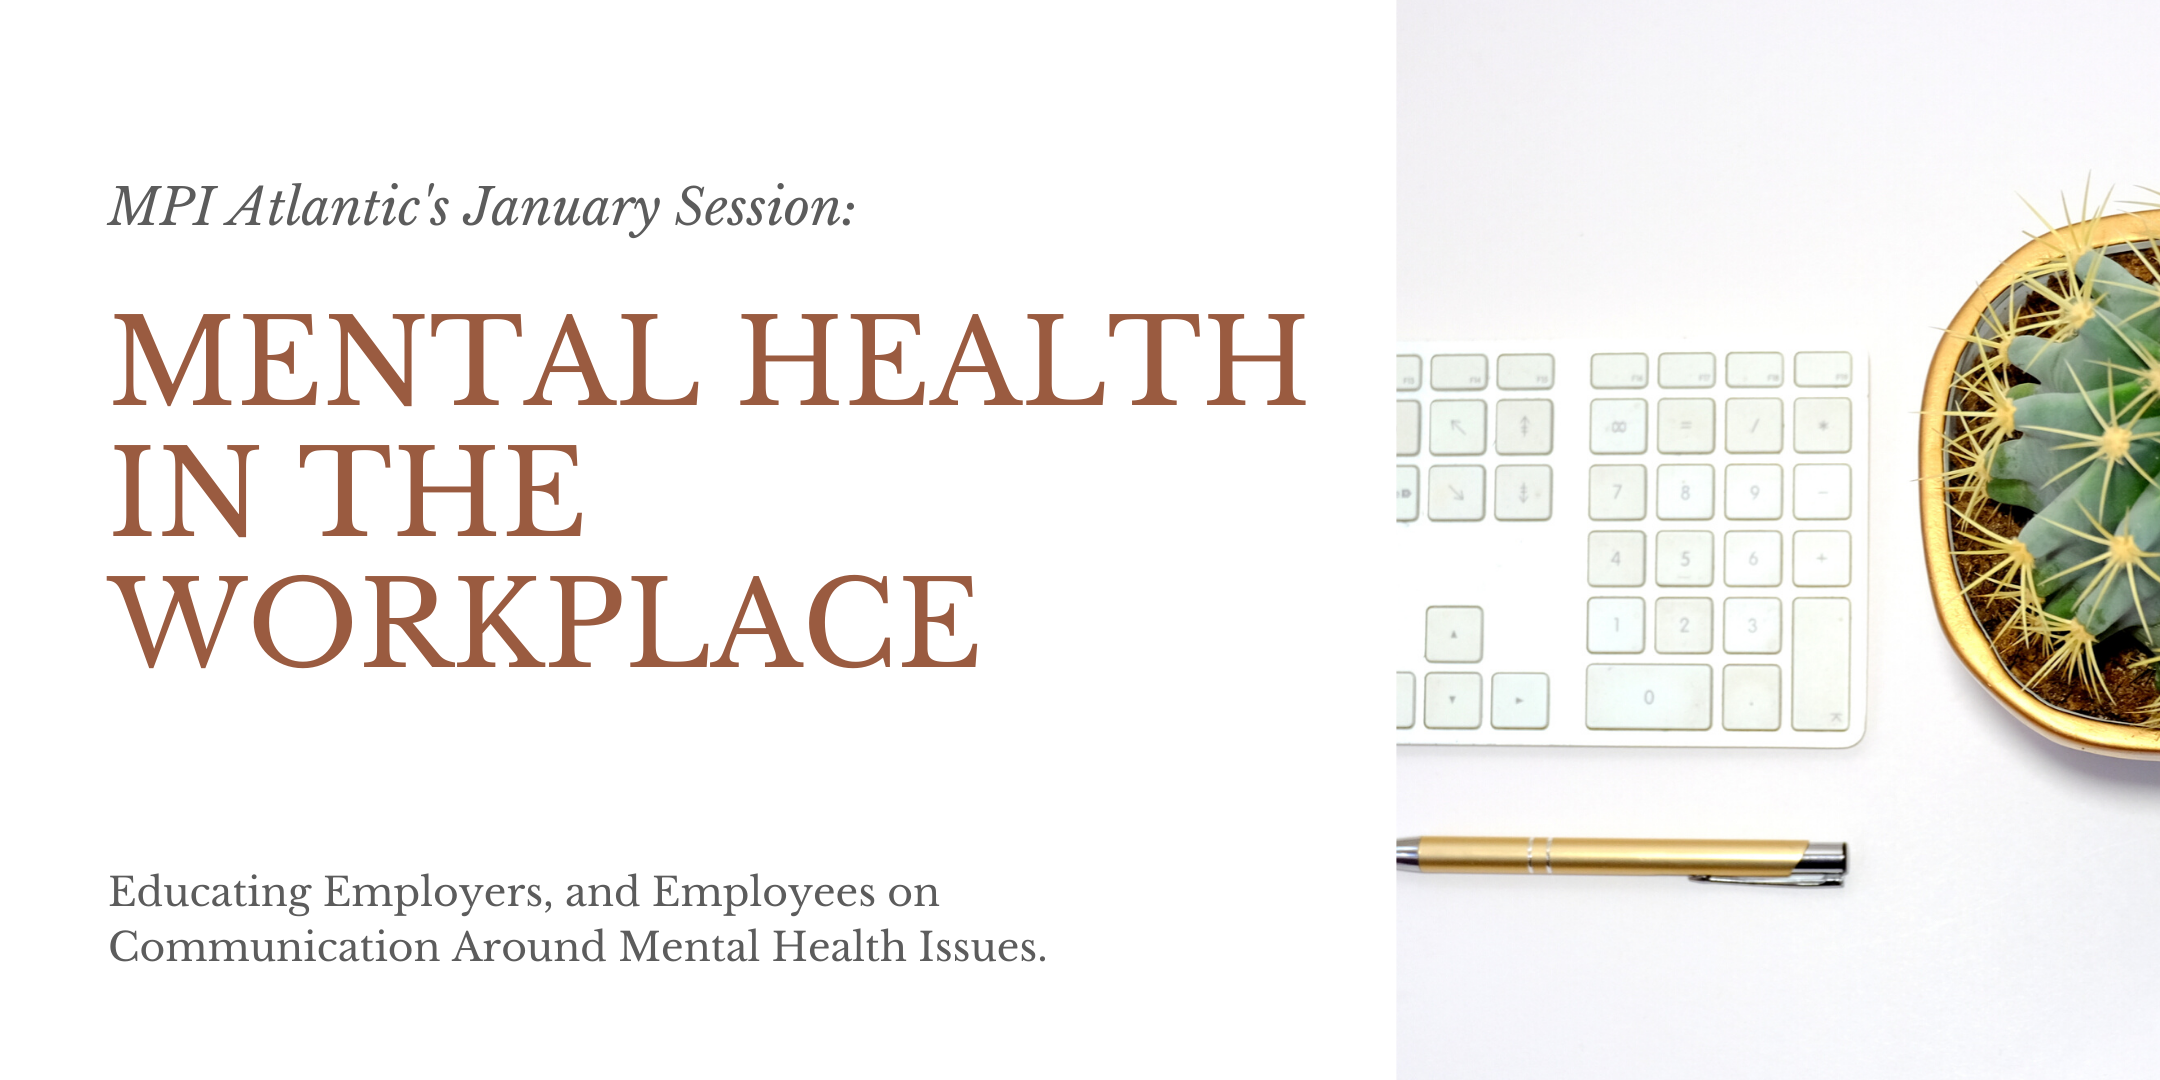 Mental Health & the workplace